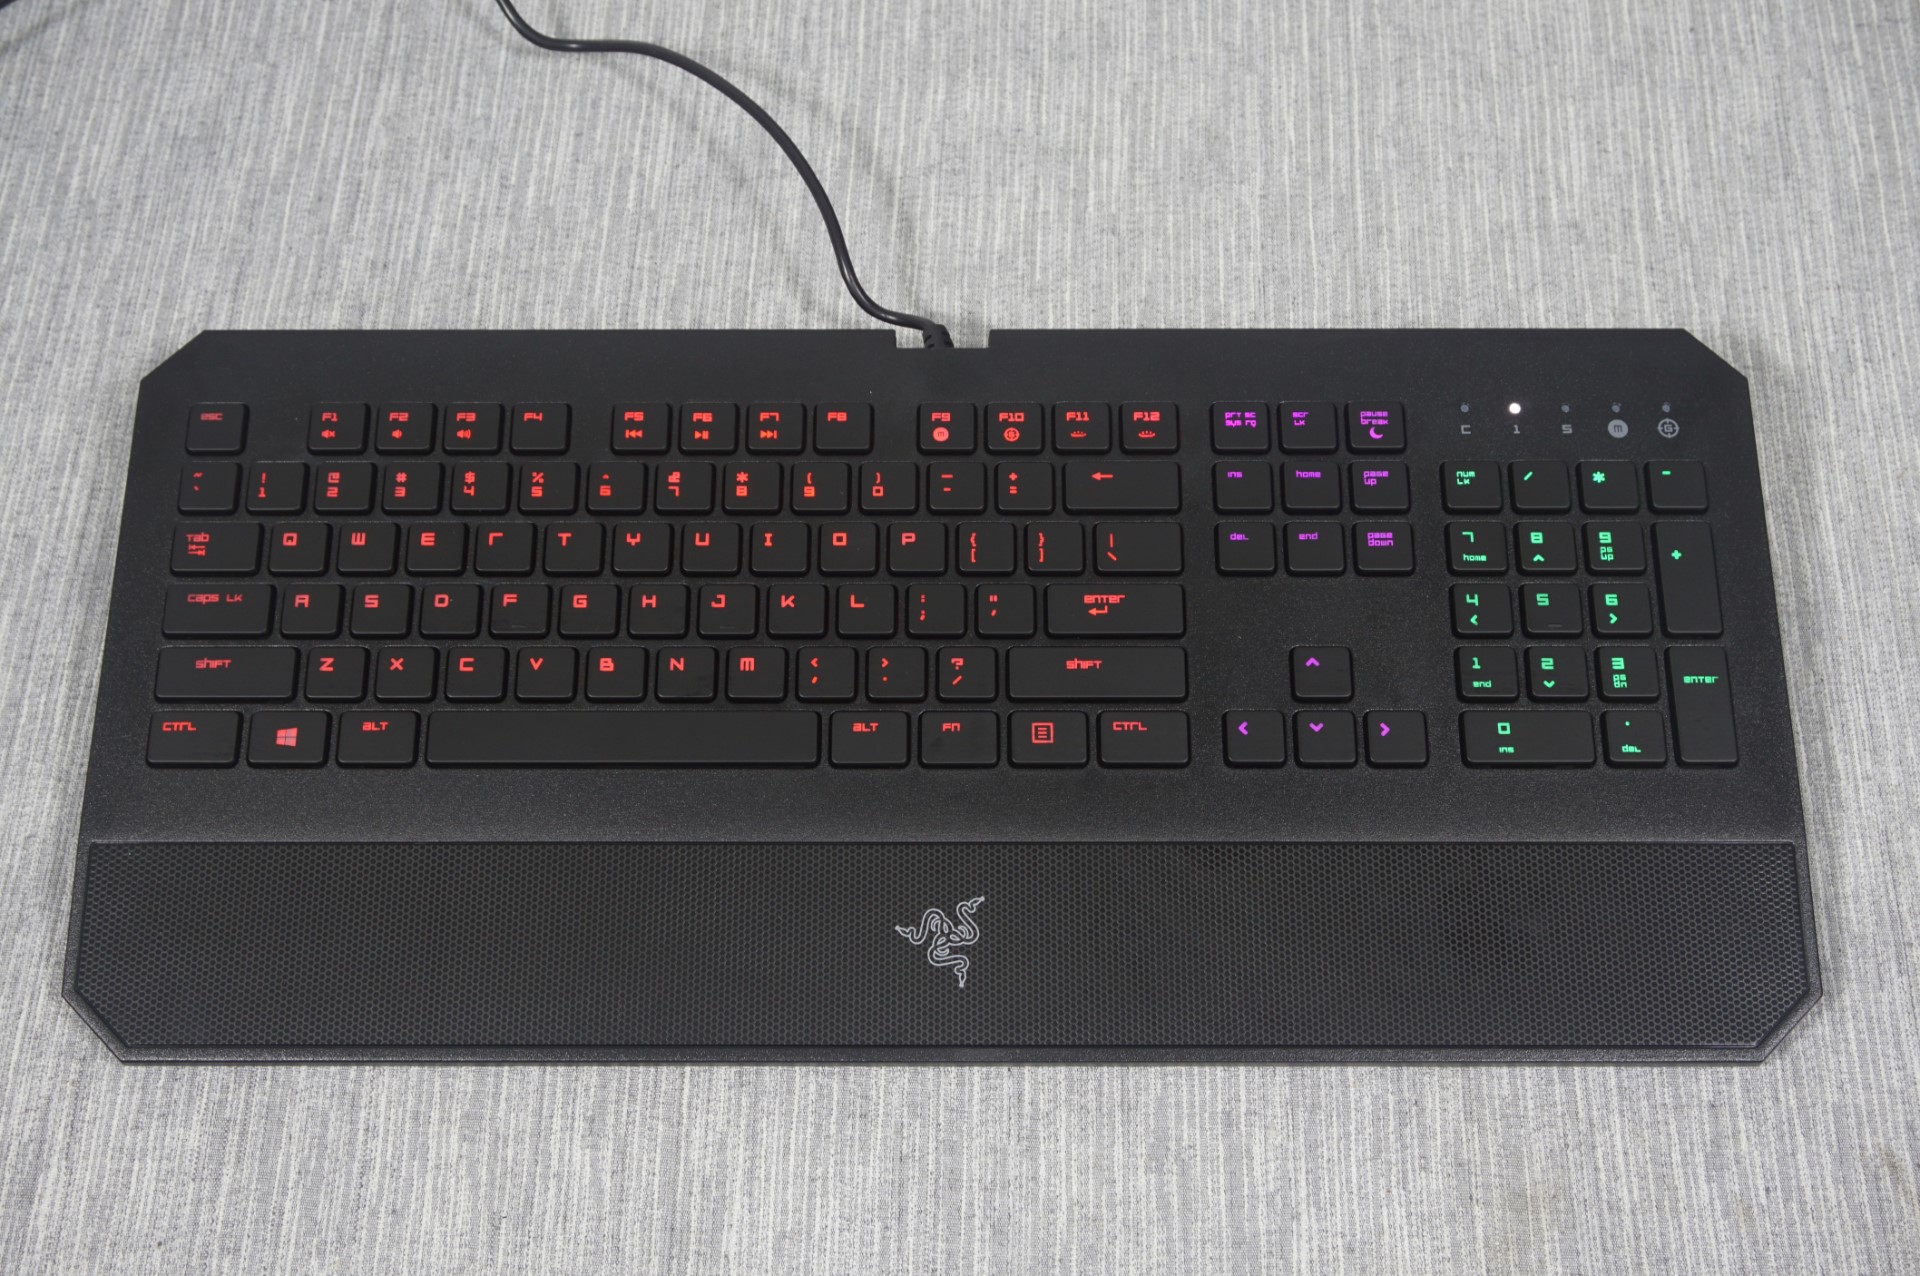 The DeathStalker Chroma Gaming Keyboard - The Razer DeathStalker Chroma Keyboard Review